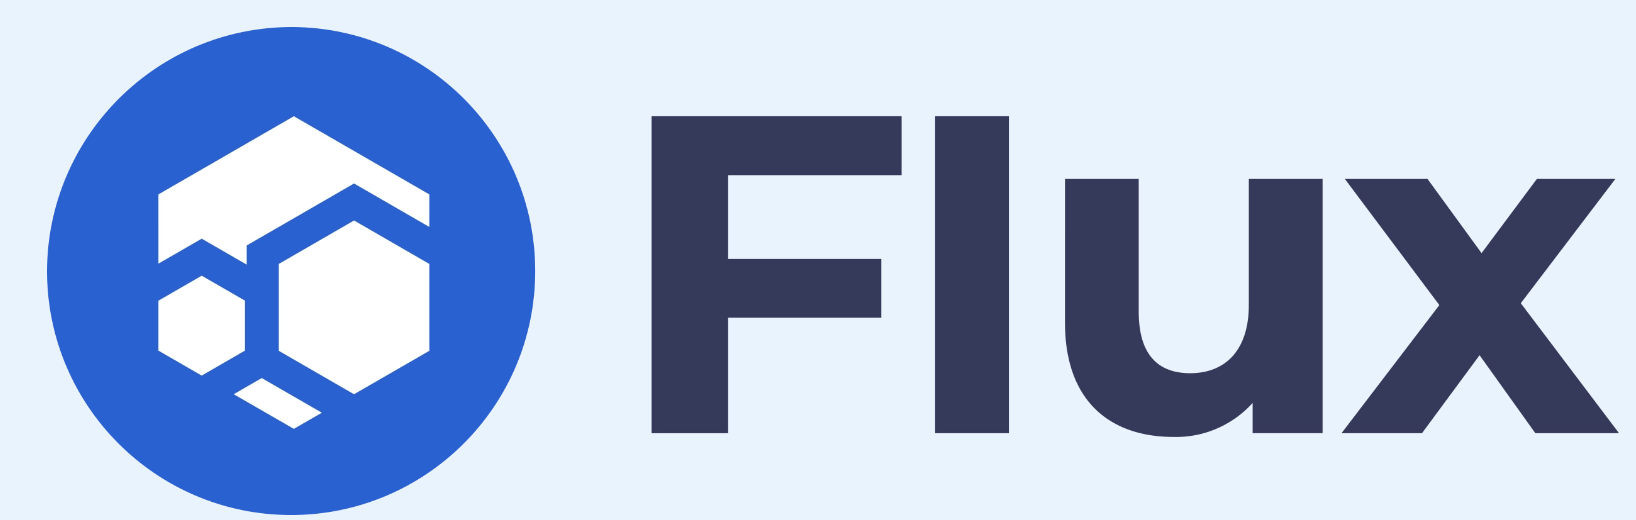 Where can I buy flux coins?